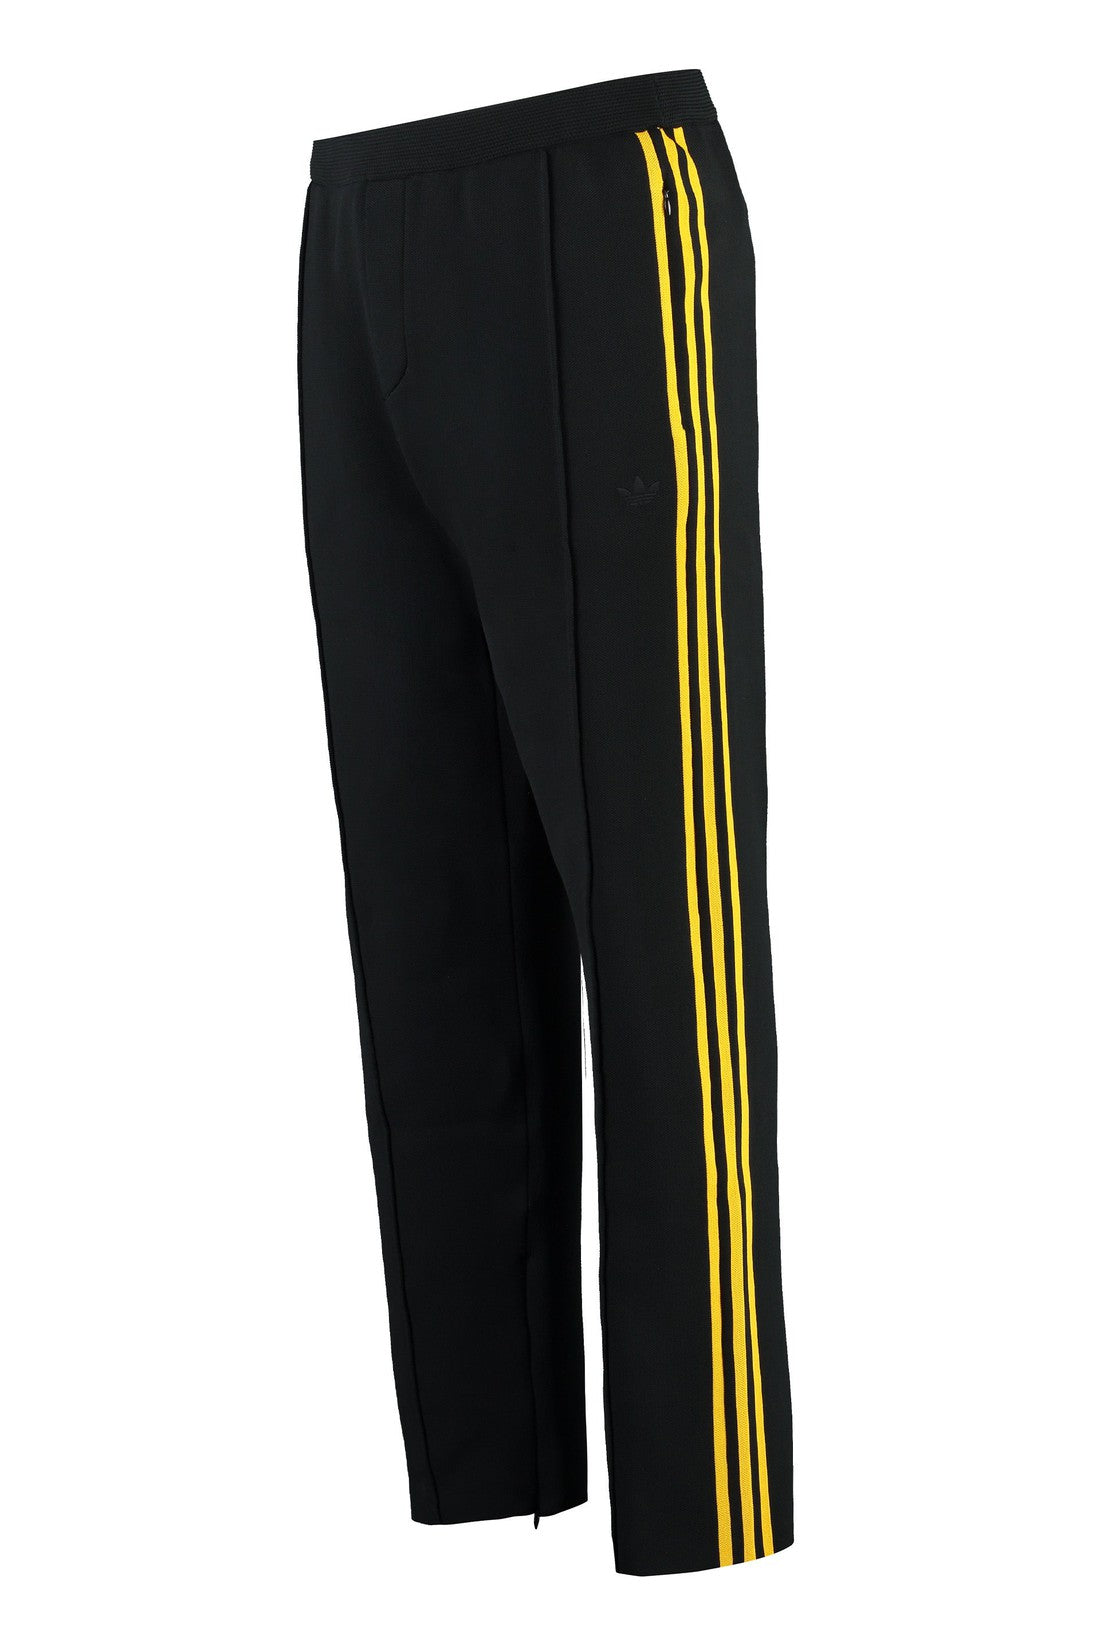 adidas-OUTLET-SALE-Adidas Originals by Wales Bonner -Knitted track-pants-ARCHIVIST